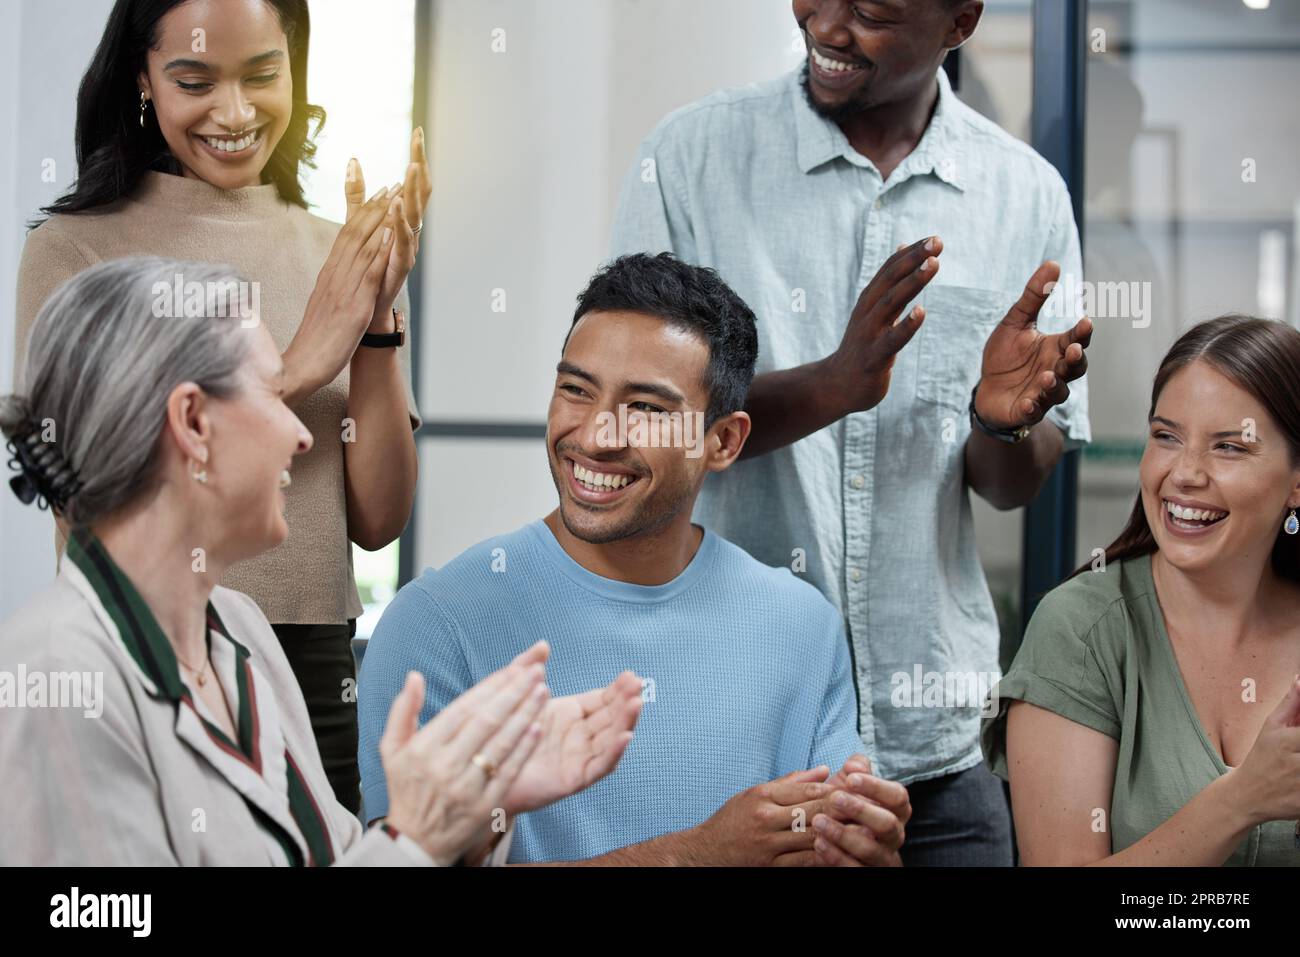 Excellence should never go unnoticed. a group of businesspeople applauding in an office. Stock Photo